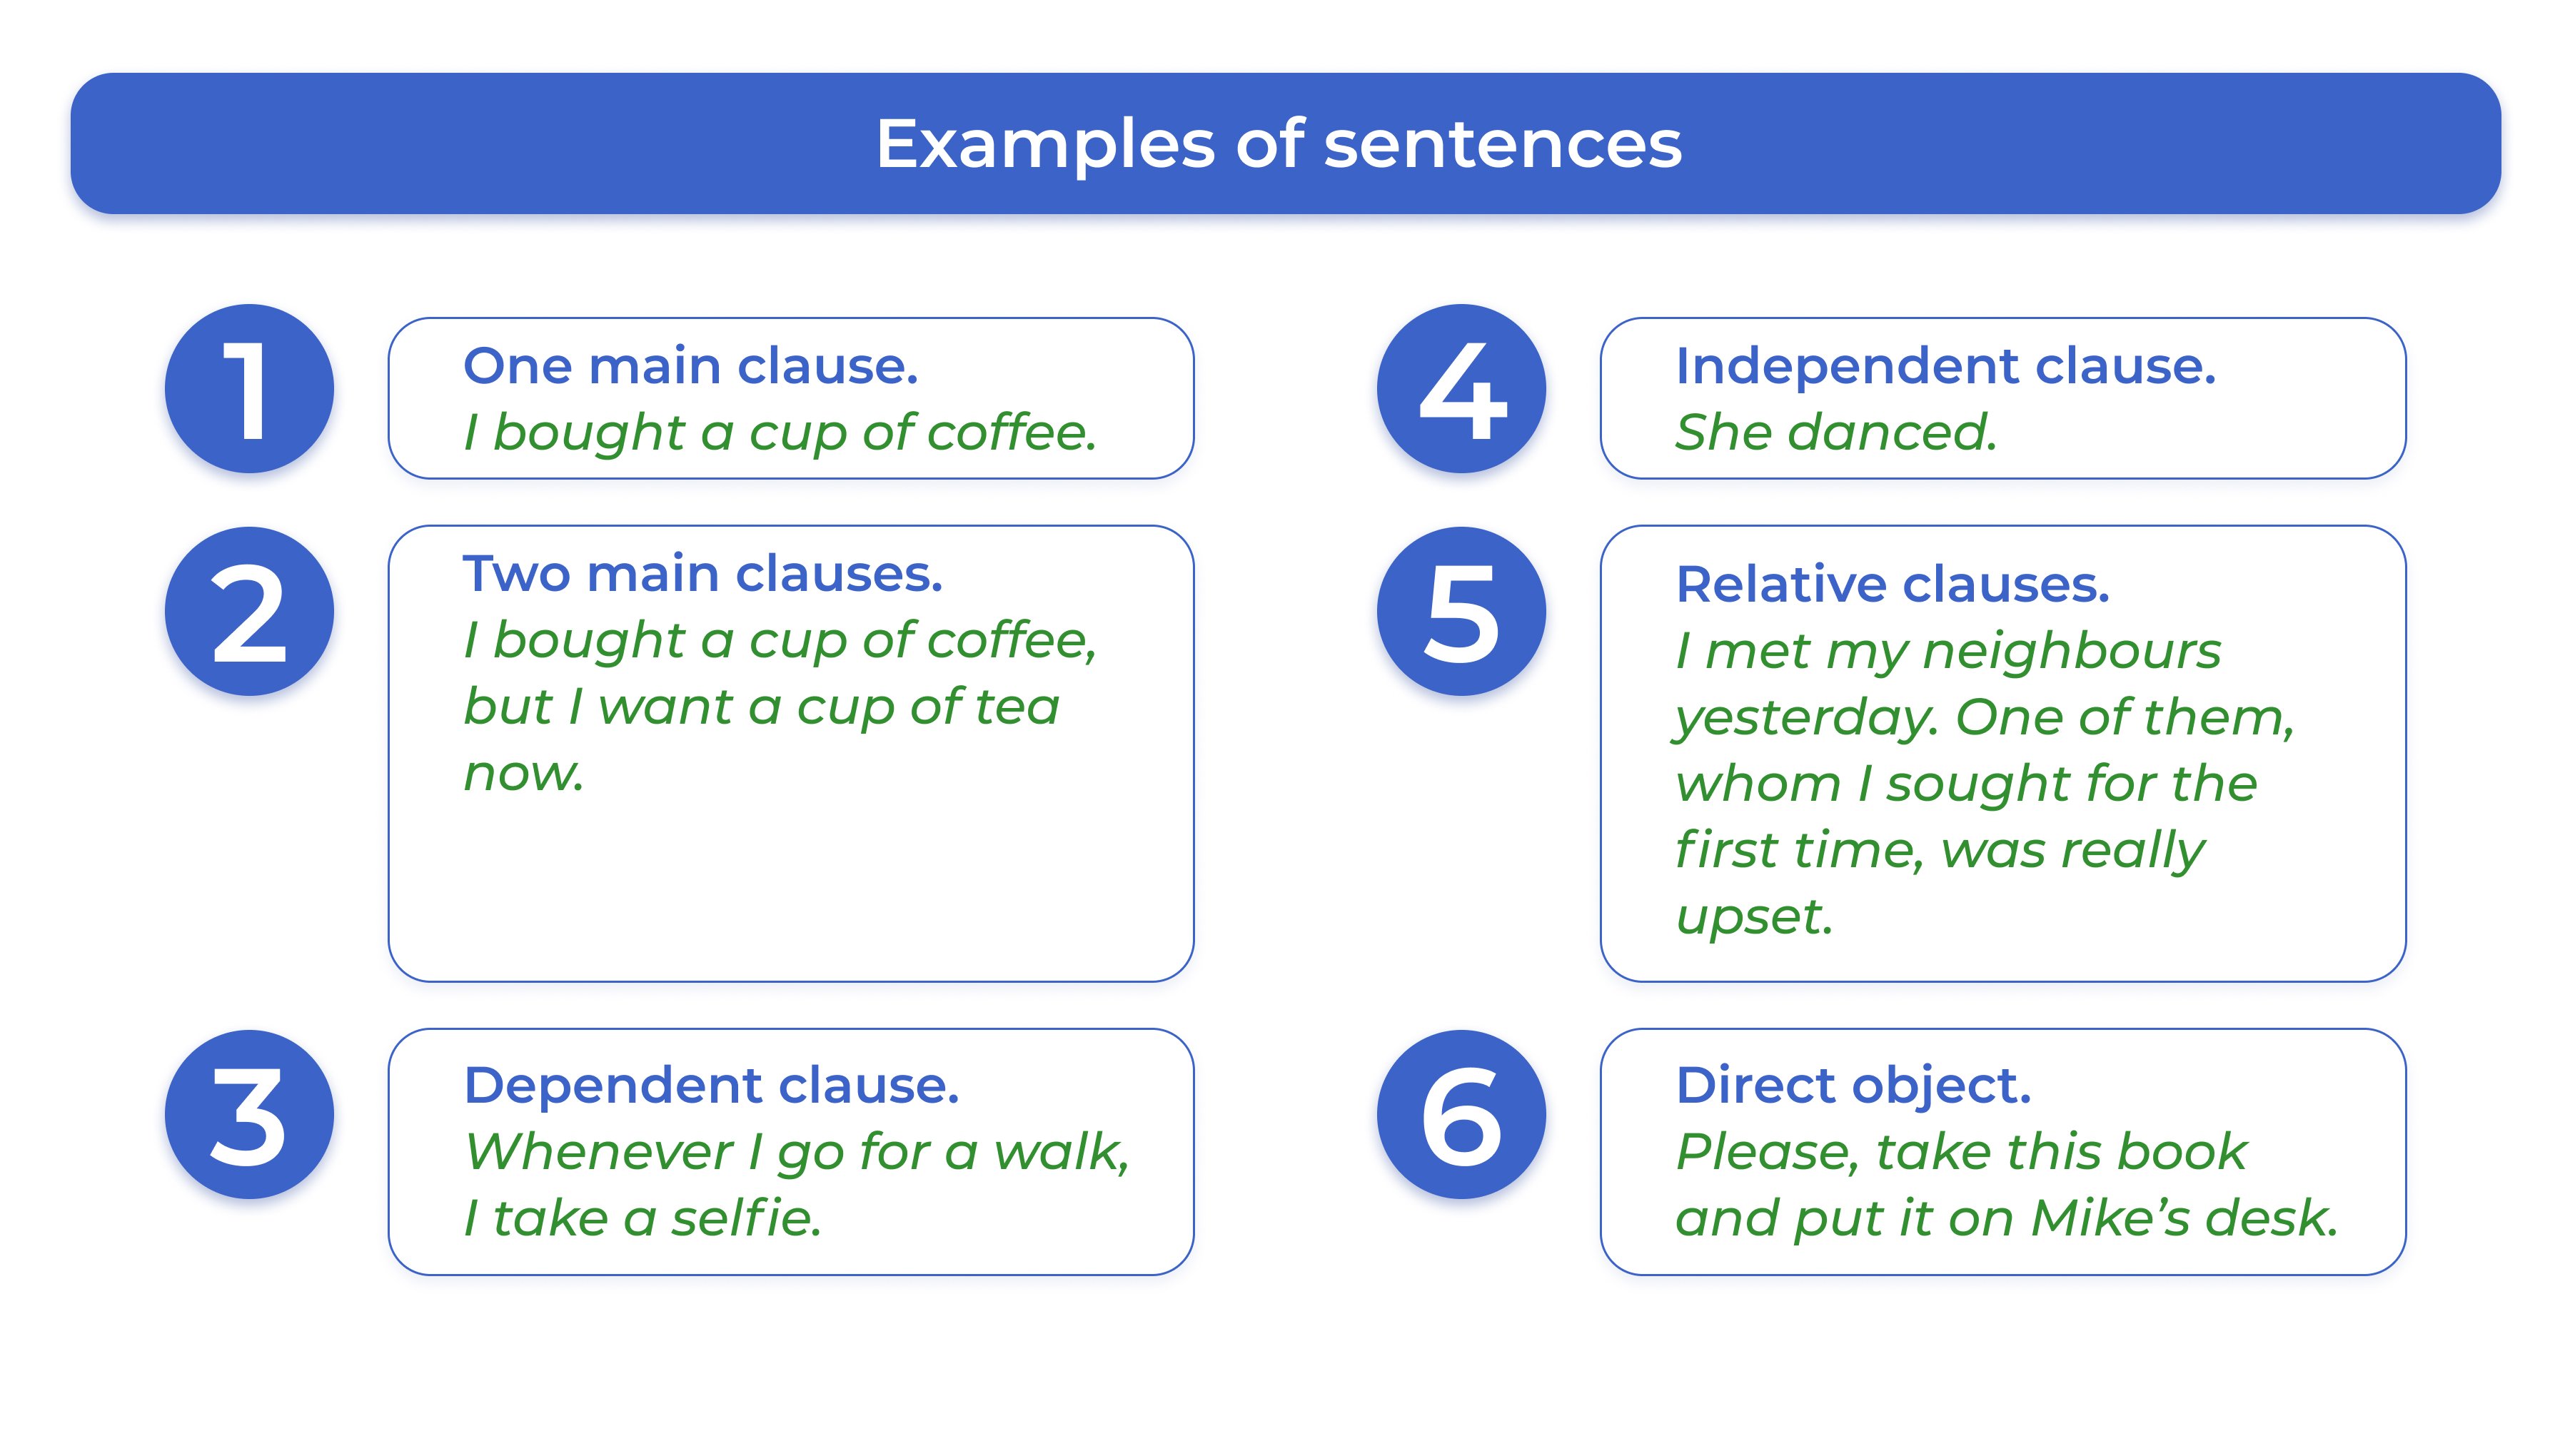 Sentence examples